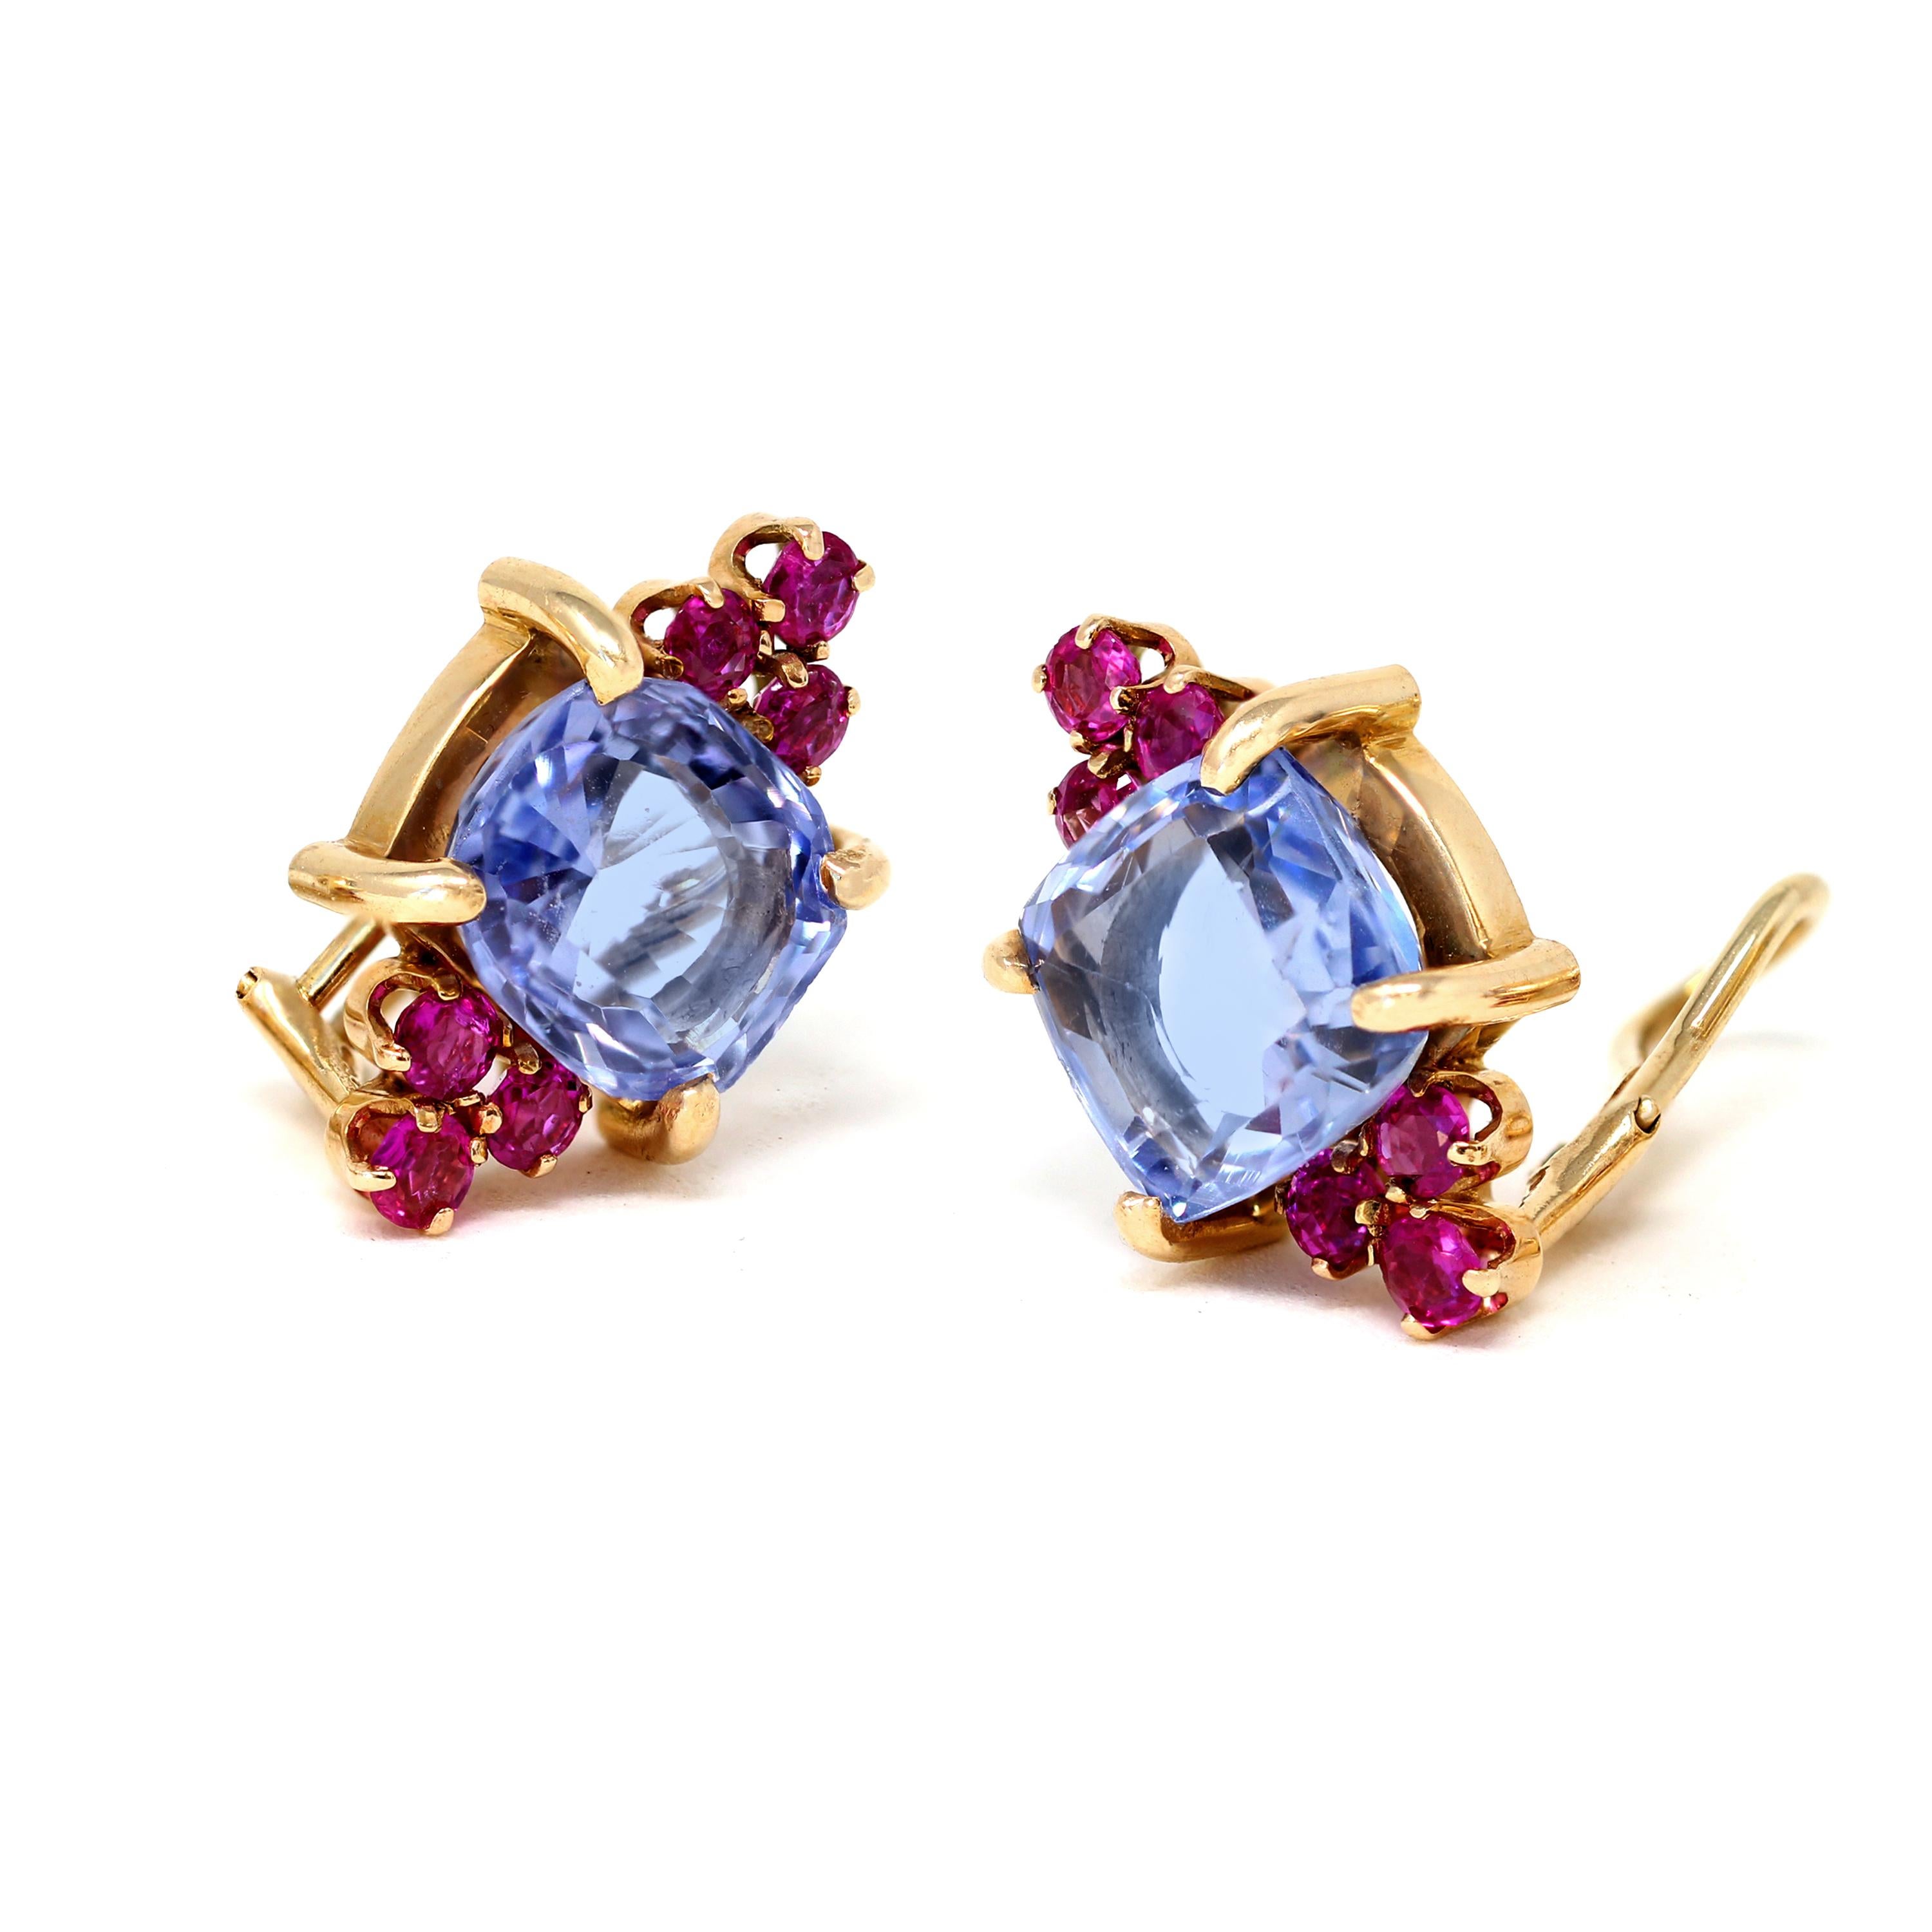 A pair of Retro era No-Heat Ceylon Sapphire and Ruby clip-on earrings circa 1940, in 14 karat yellow Gold. Boasting an exquisite combination of colors, these ear clips are made of cushion-cut Ceylon Sapphires (no heat) with an estimated weight of